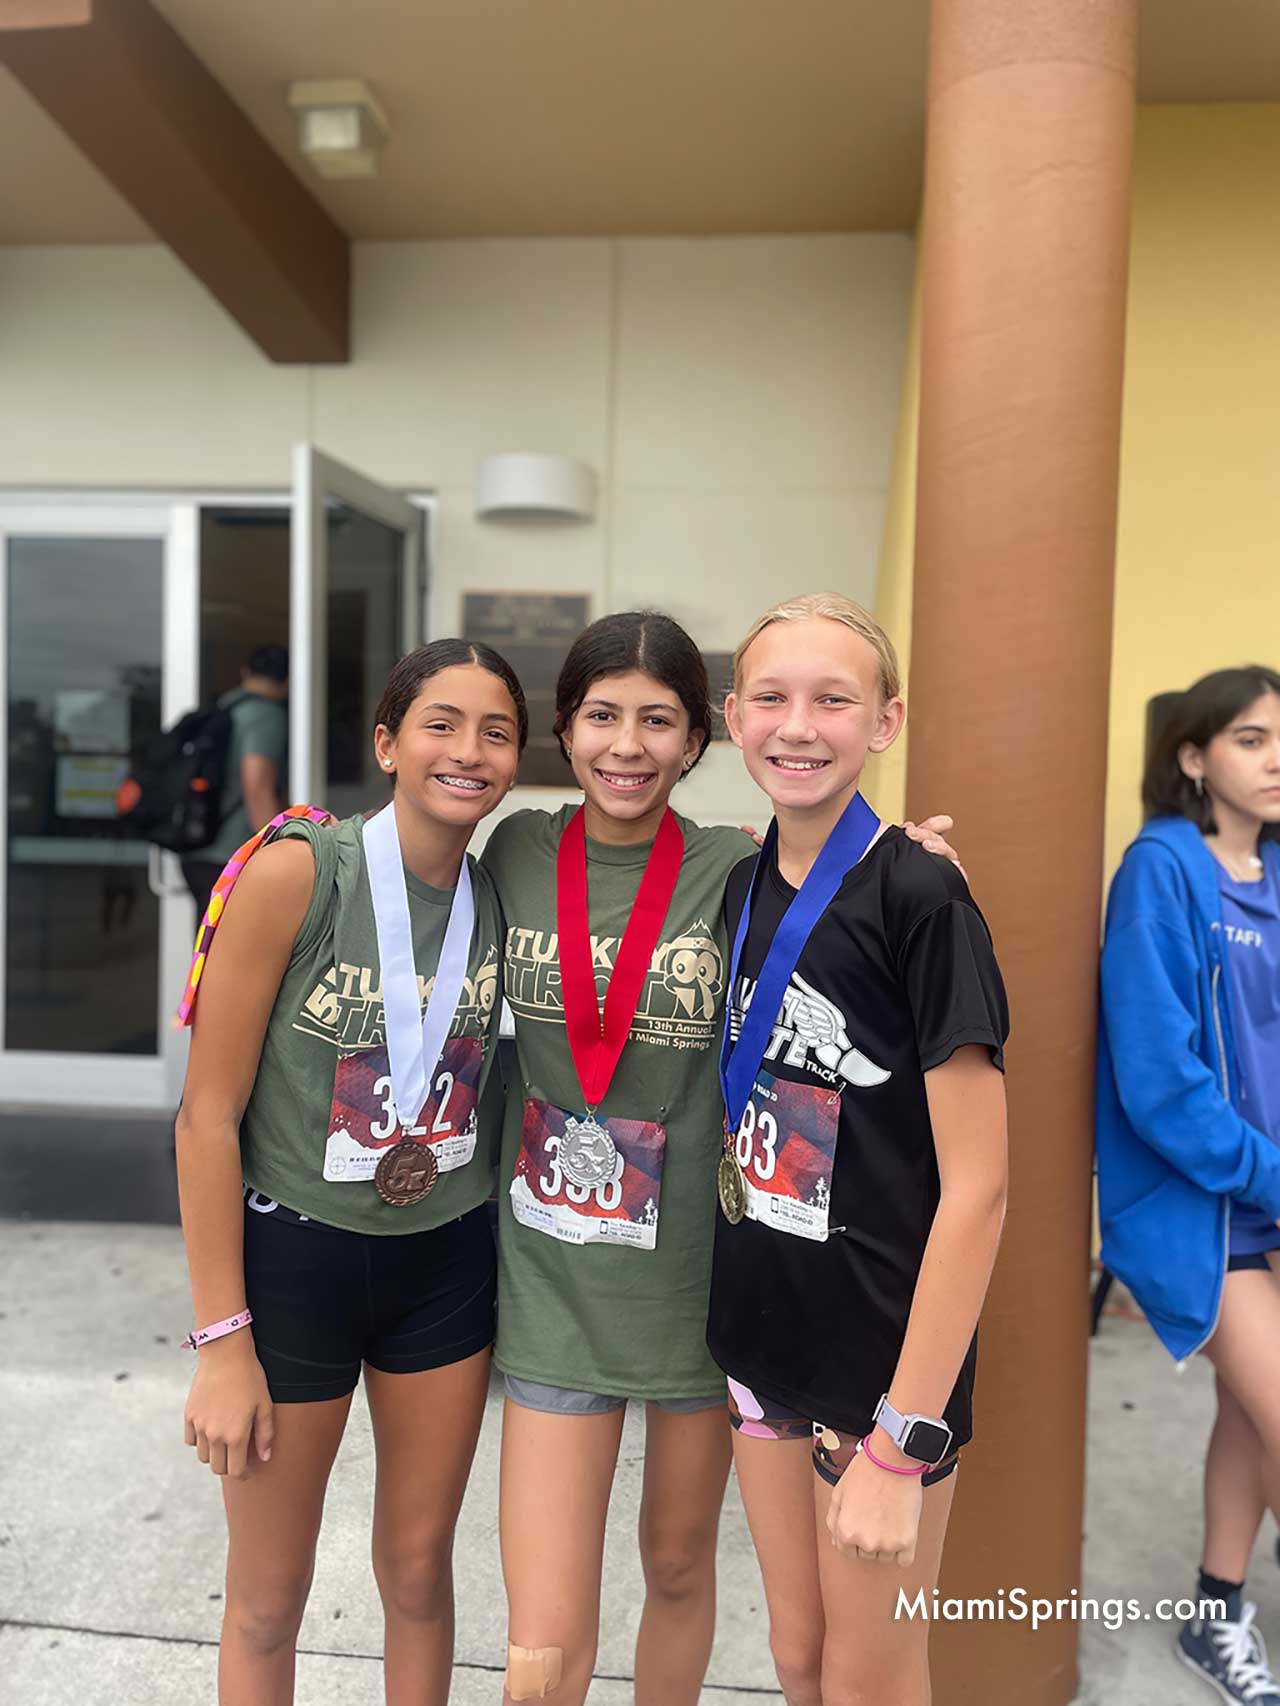 Ava Barrera, Emily Veiguela, and Kristen Rodriguez at the 2022 Miami Springs Turkey Trot